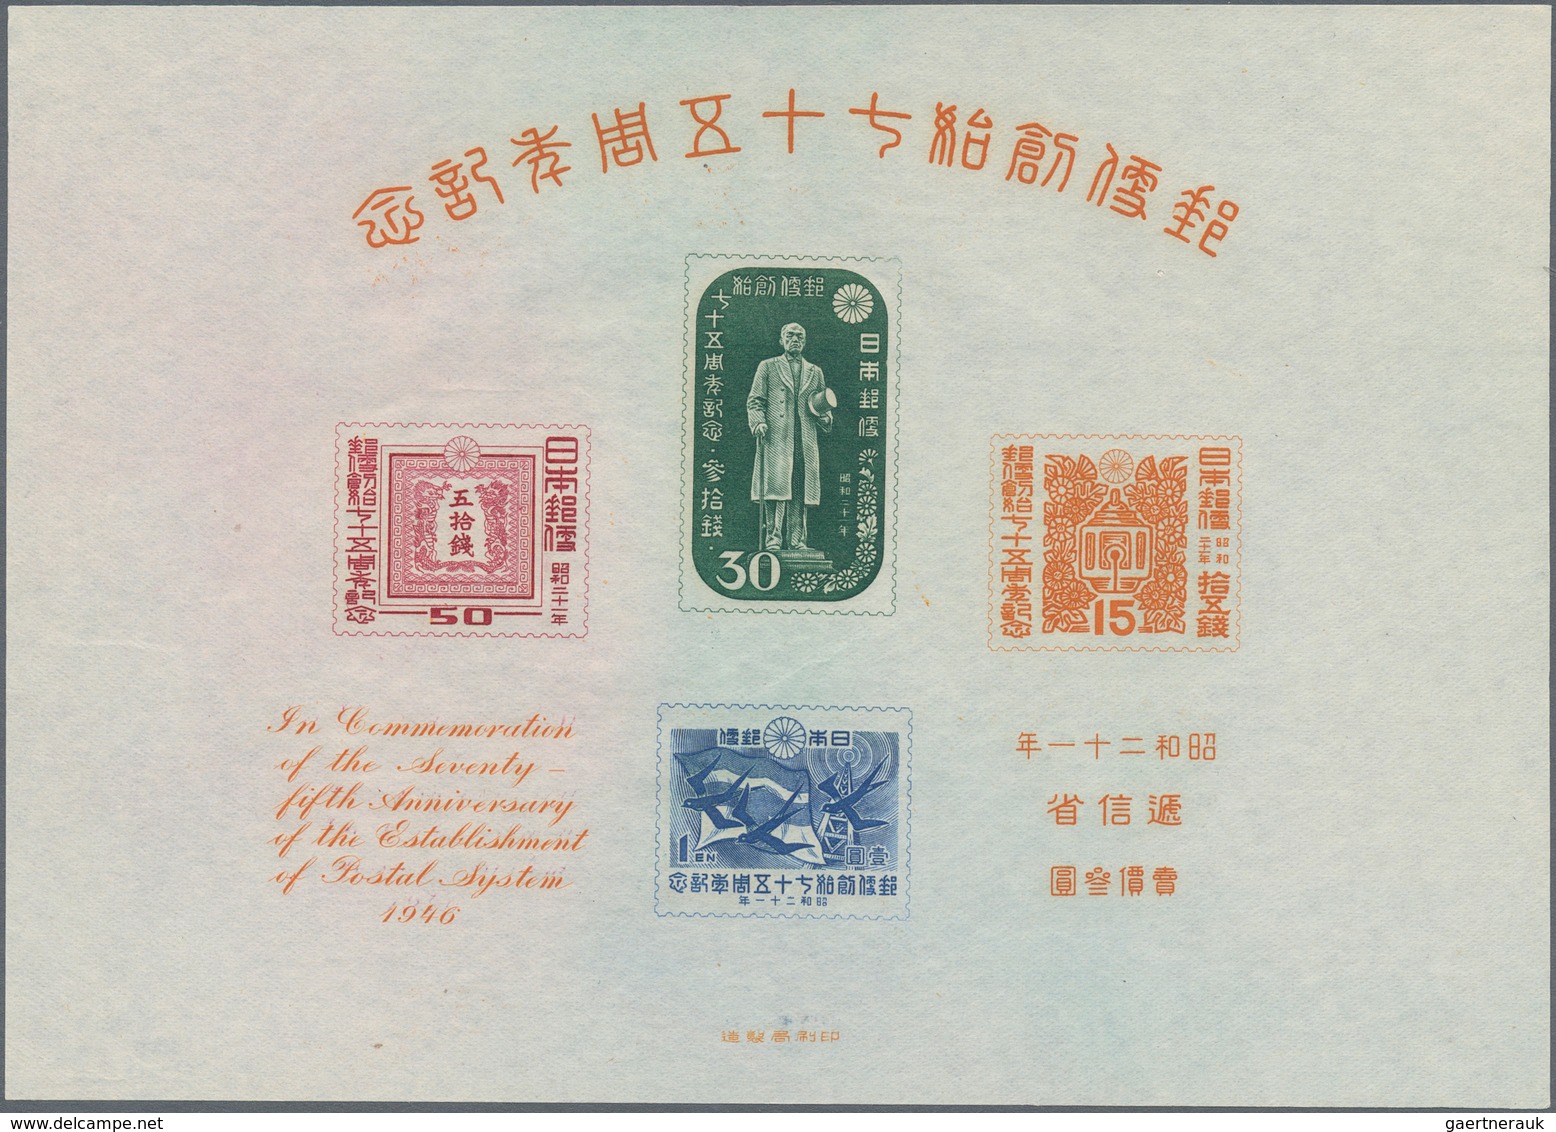 Japan: 1872/1980, mint inc. MNH and used collection in mounts on self-created pages in three binders